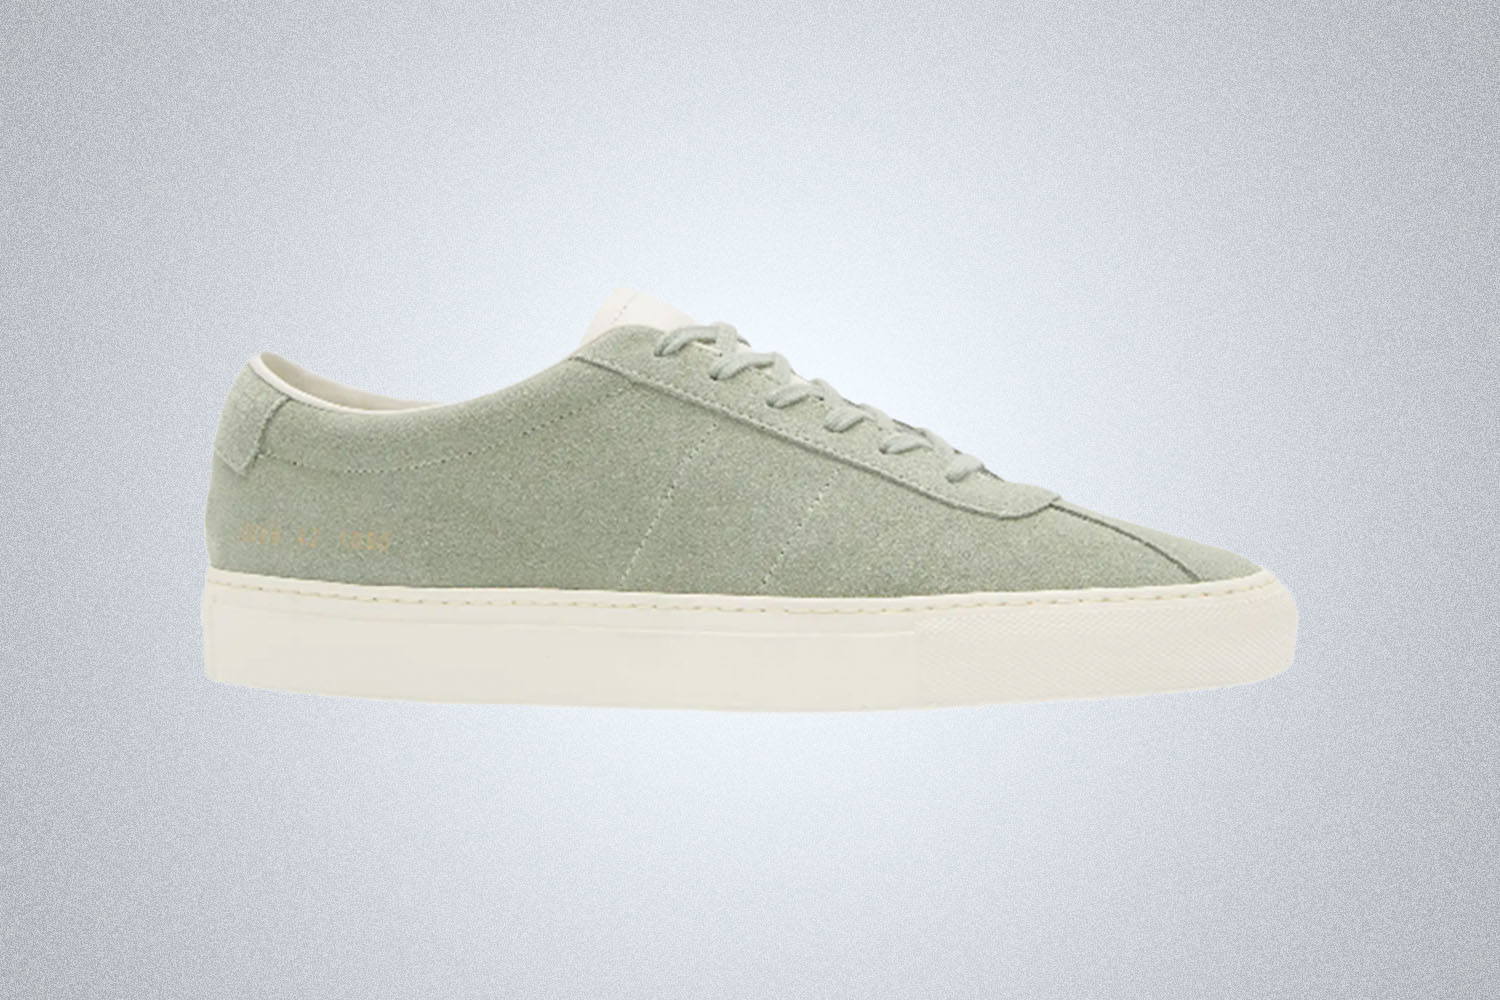 a light grey low cut sneaker from Common Projects on a grey background